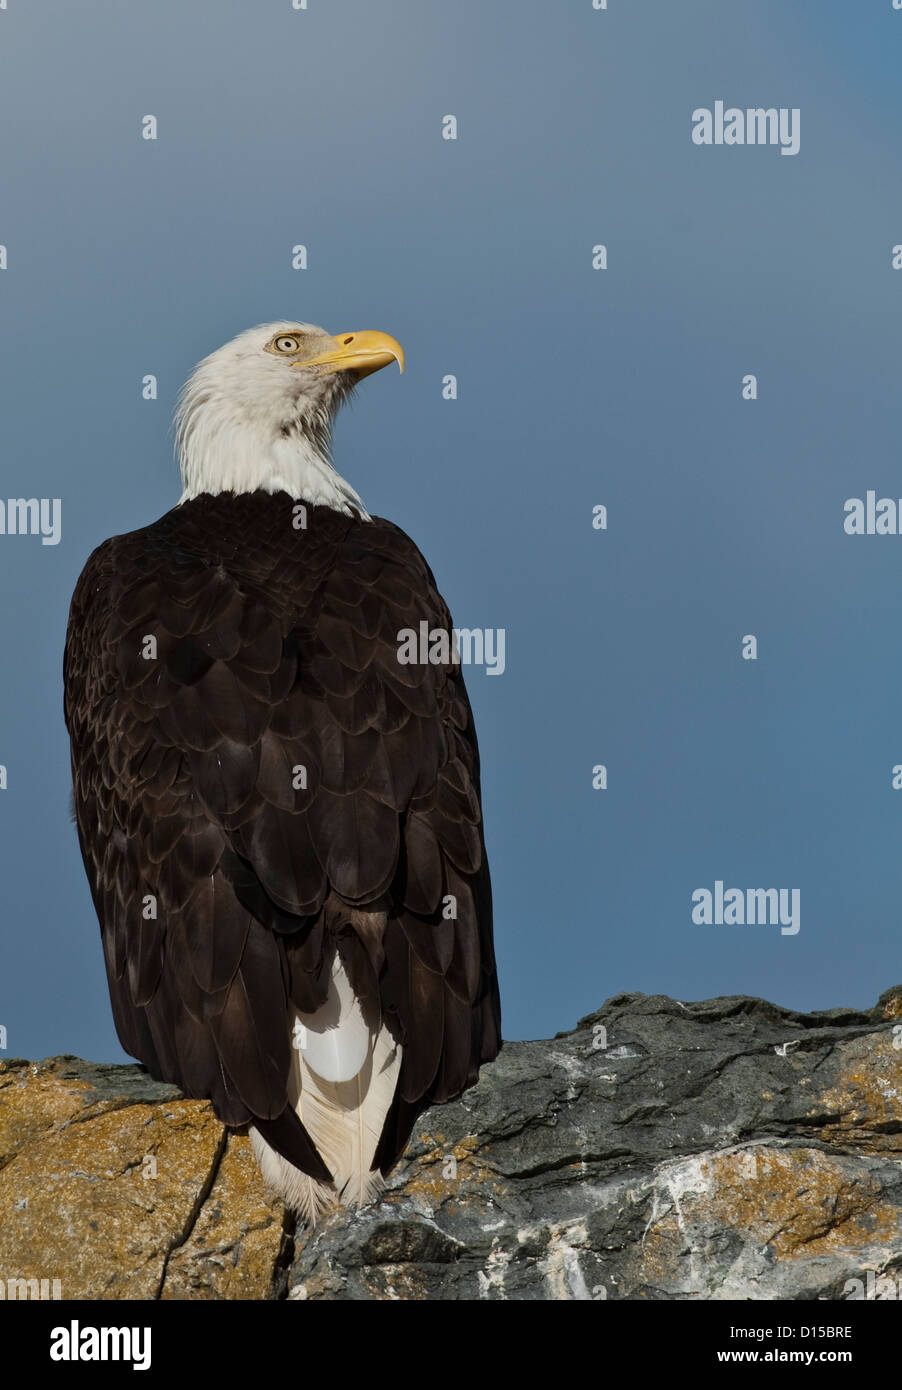 A Bald Eagle, Haliaeetus leucocephalus, rests on a rocky perch north of Vancouver Island, British Columbia, Canada. Stock Photo